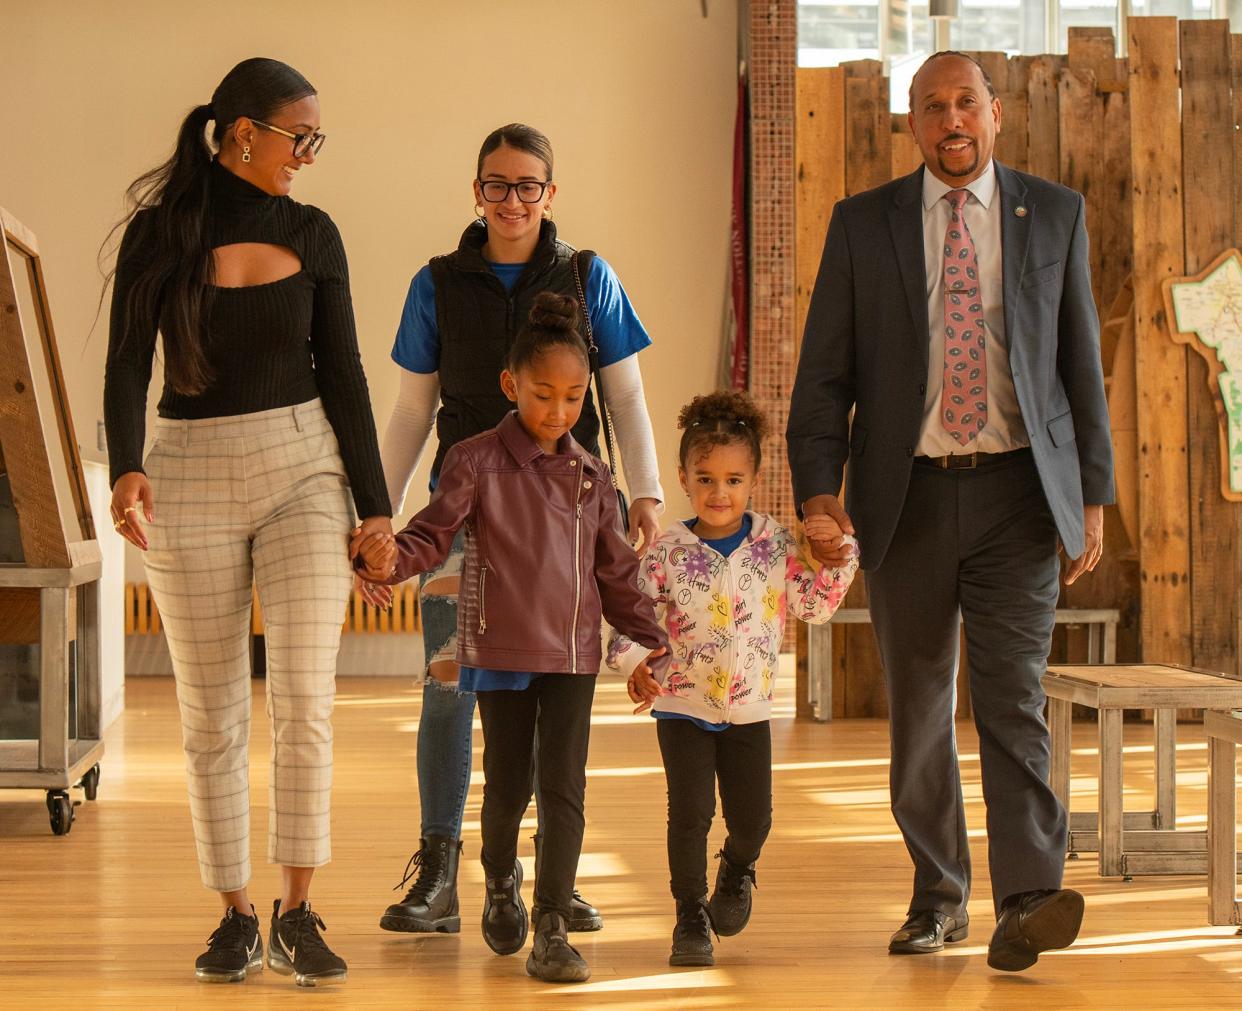 Khrystian King arrives to vote with his family at the Blackstone Heritage Corridor Visitor Center Tuesday. King’s wife, Tatiana King, and their daughter, Leiyani, 7, were joined by Tatiana’s sister, Elyse Pena, and her daughter, Janae, 4, left to right.